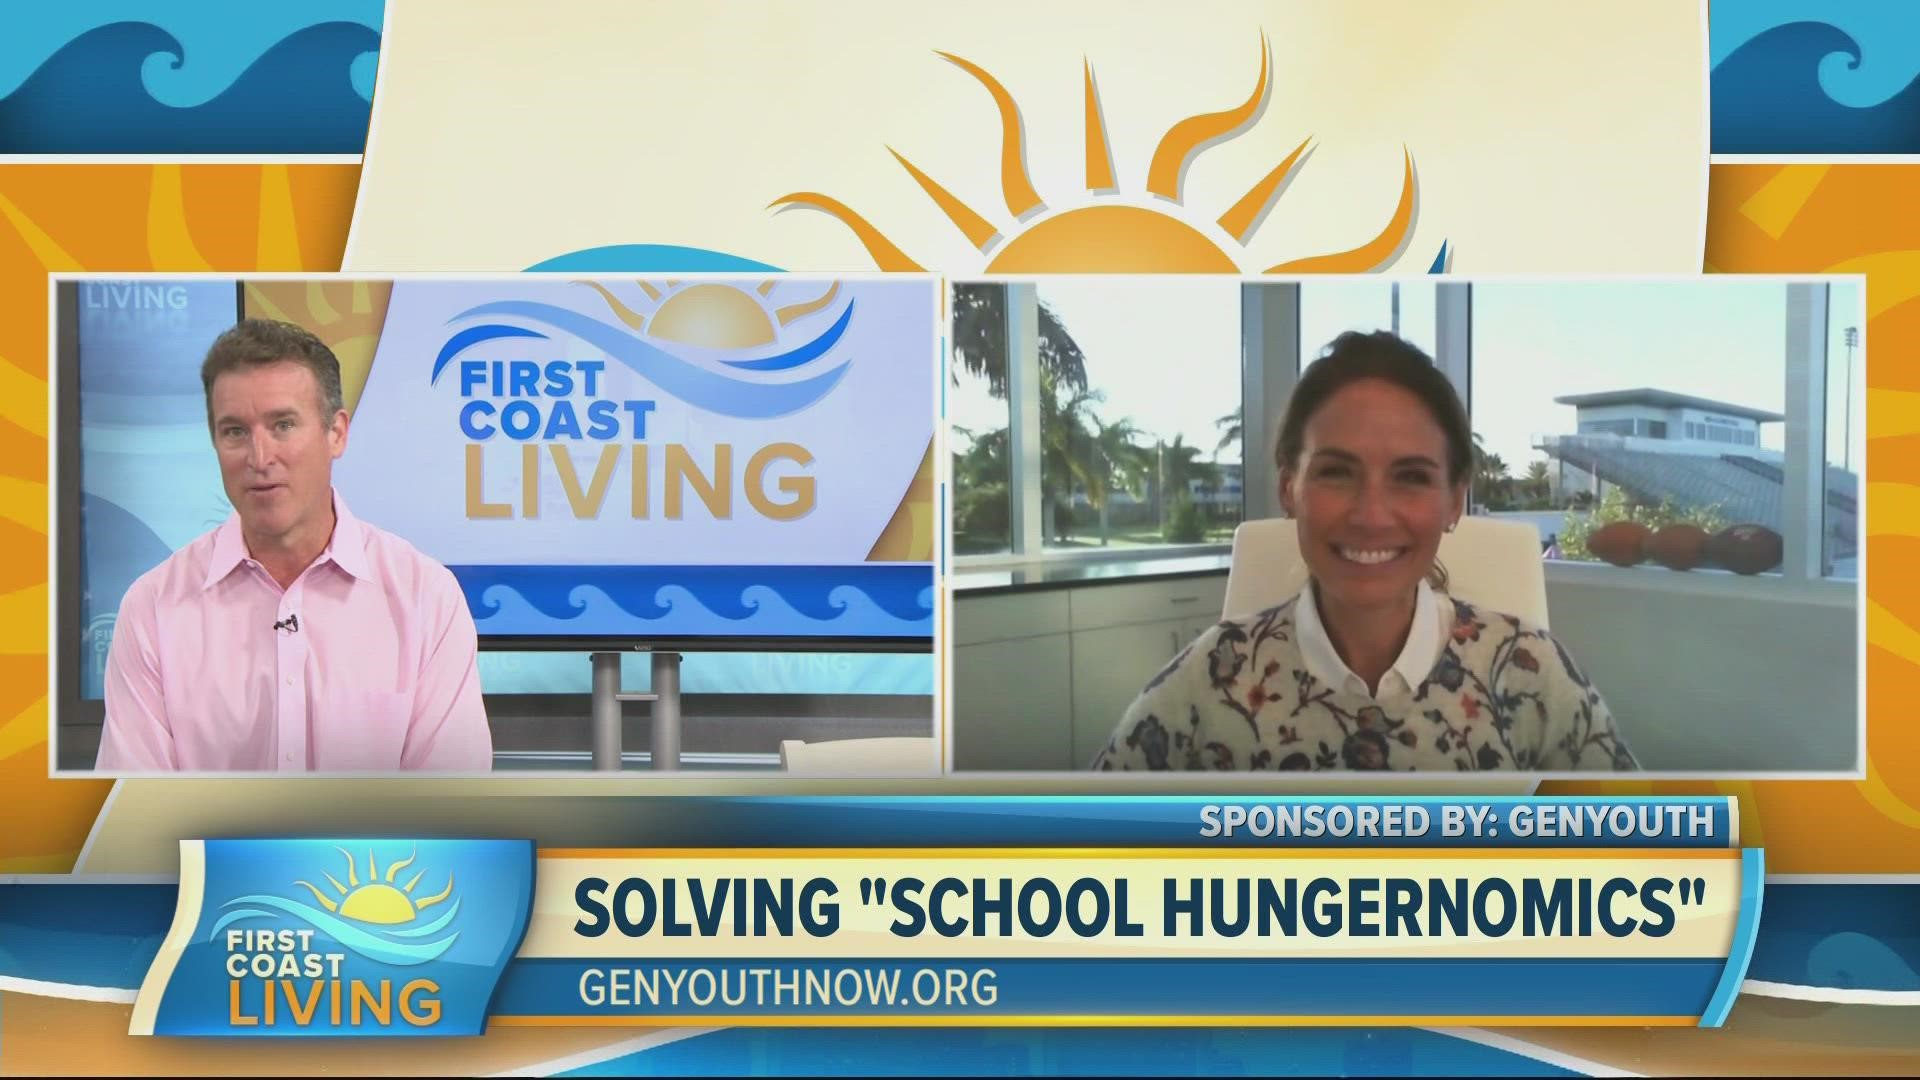 Over 30 million students rely on school meals. CEO and Founder of GENYOUth Alexis Glick shares the local impact and how you can help.